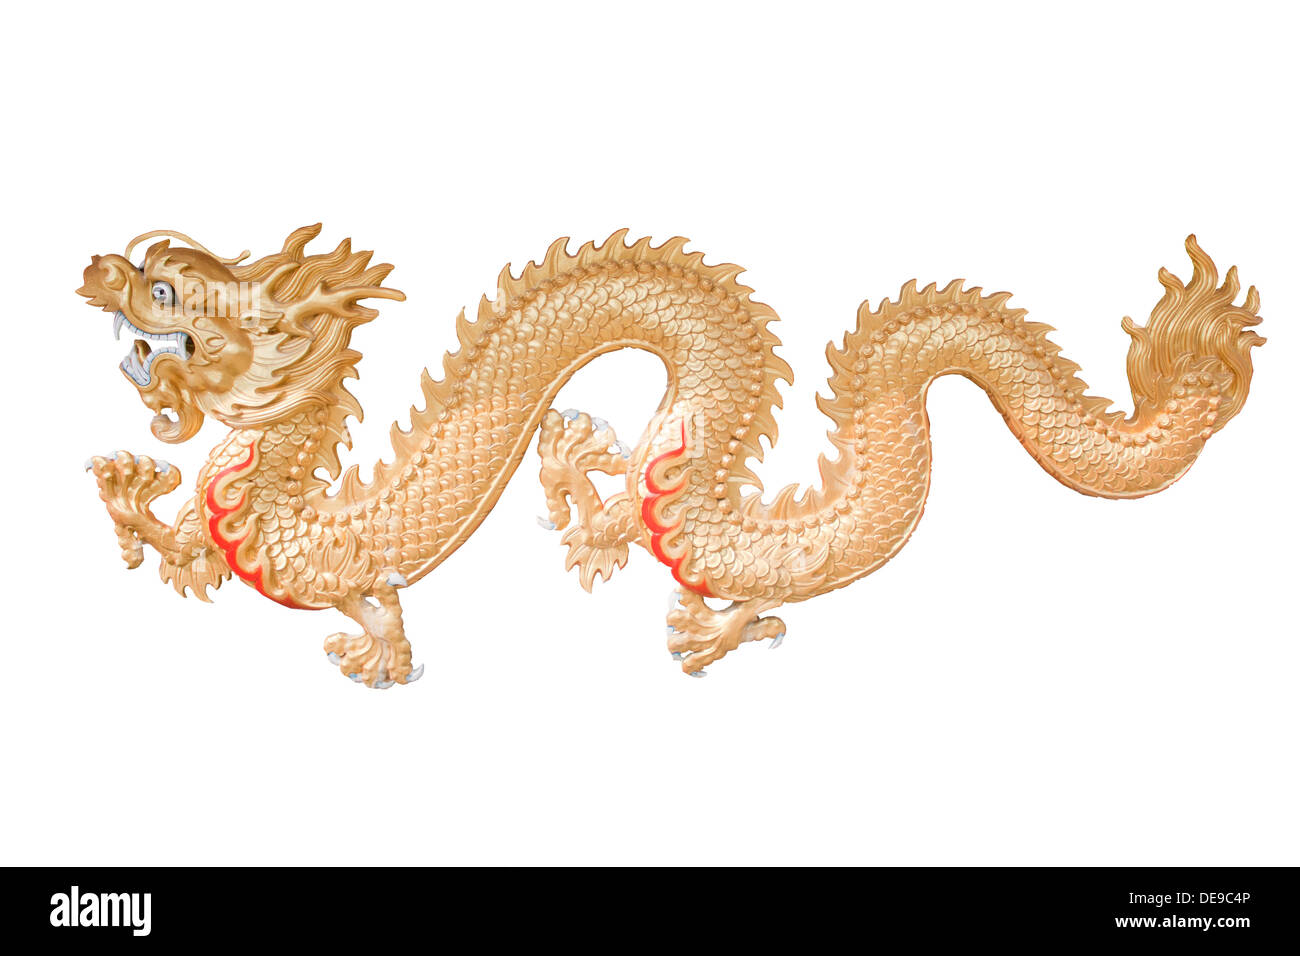 ancient animal art asia asian big china chinese culture decoration decorative design dragon east fantasy festival gold golden Stock Photo